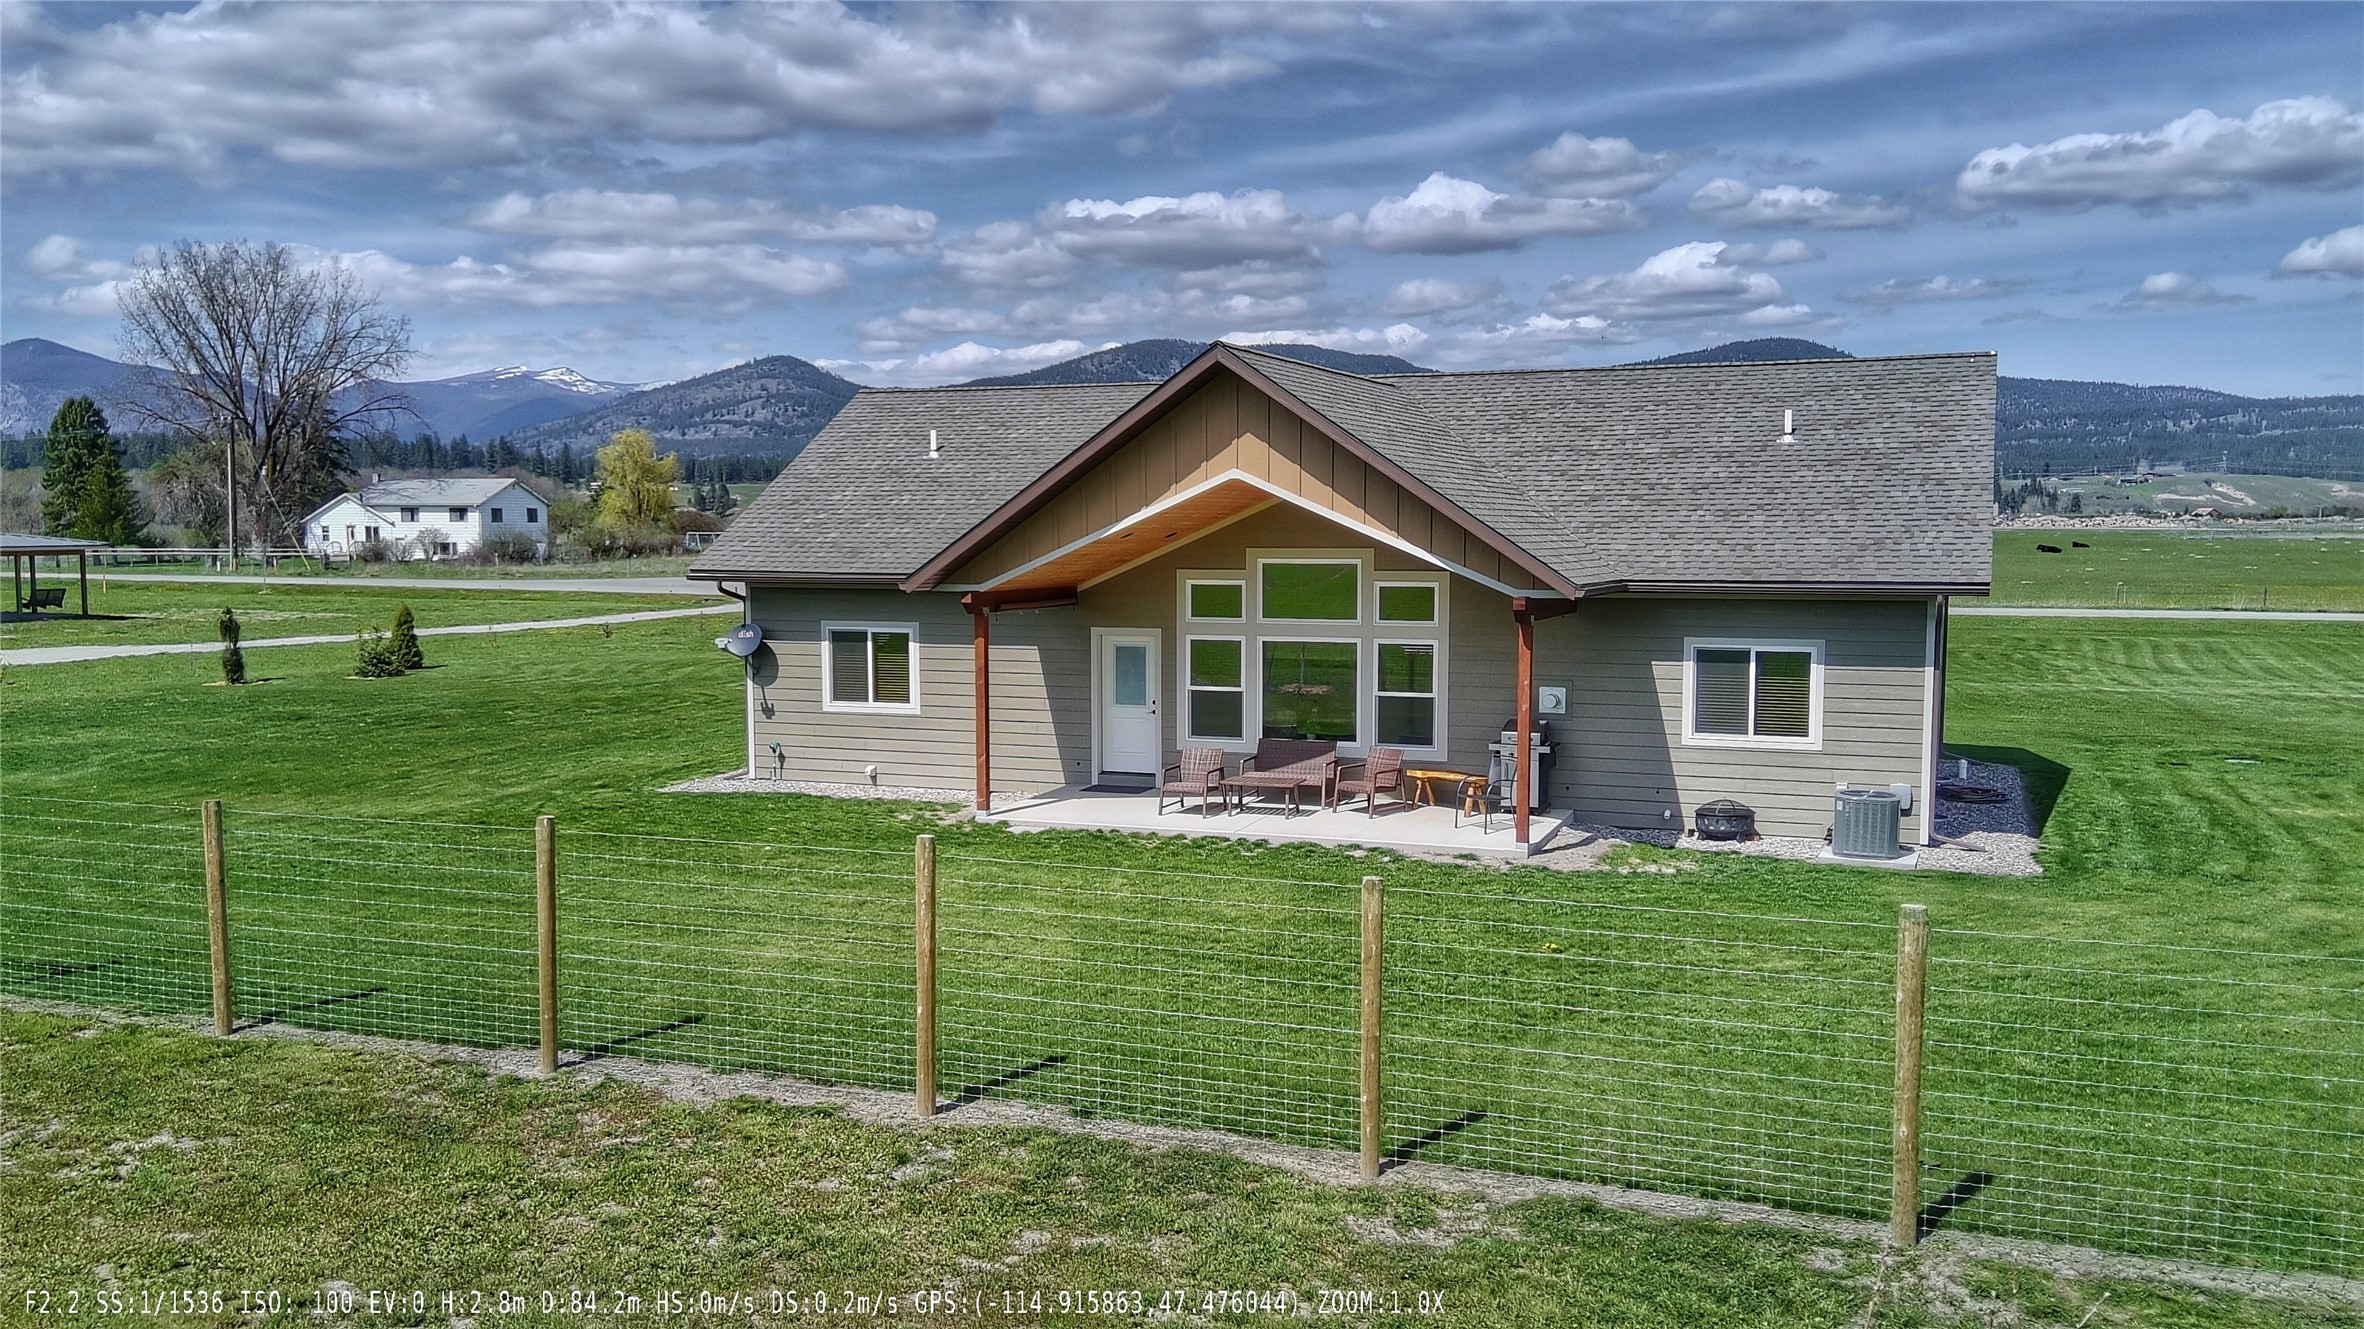 Immaculate 3 bed 2 bath single level home built in 2021 close to the Clark Fork River!  This level property is just minutes out of Plains MT in a quiet, residential neighborhood.  Enjoy a large, fenced garden area with a 12' gate & shed, a 10' x 20' mini barn, temperature zoned fruit & evergreen, trees, & partial fencing.  The 1680 sq ft home has covered front and rear porches. The garage is heated & insulated and has a utility sink.  There is a hot or cold option for the garage hose connection.  In the garage is a pull-down ladder access to above garage storage room, 21' x 25' floor space.  There is a fully insulated 4' crawl space for storage.  Inside the home is custom solid wood cabinetry throughout and granite and corian countertops.  There are custom alder trim and doors throughout the home. The propane fireplace was custom built with local rocks. Great producing well and fiber optic internet to the home.  Located 2 hours from Glacier National Park & Whitefish Mountain. Within 1 hour 15 minutes of the Missoula Airport.  Call Jeannette (406) 270-3921 or your real estate professional.